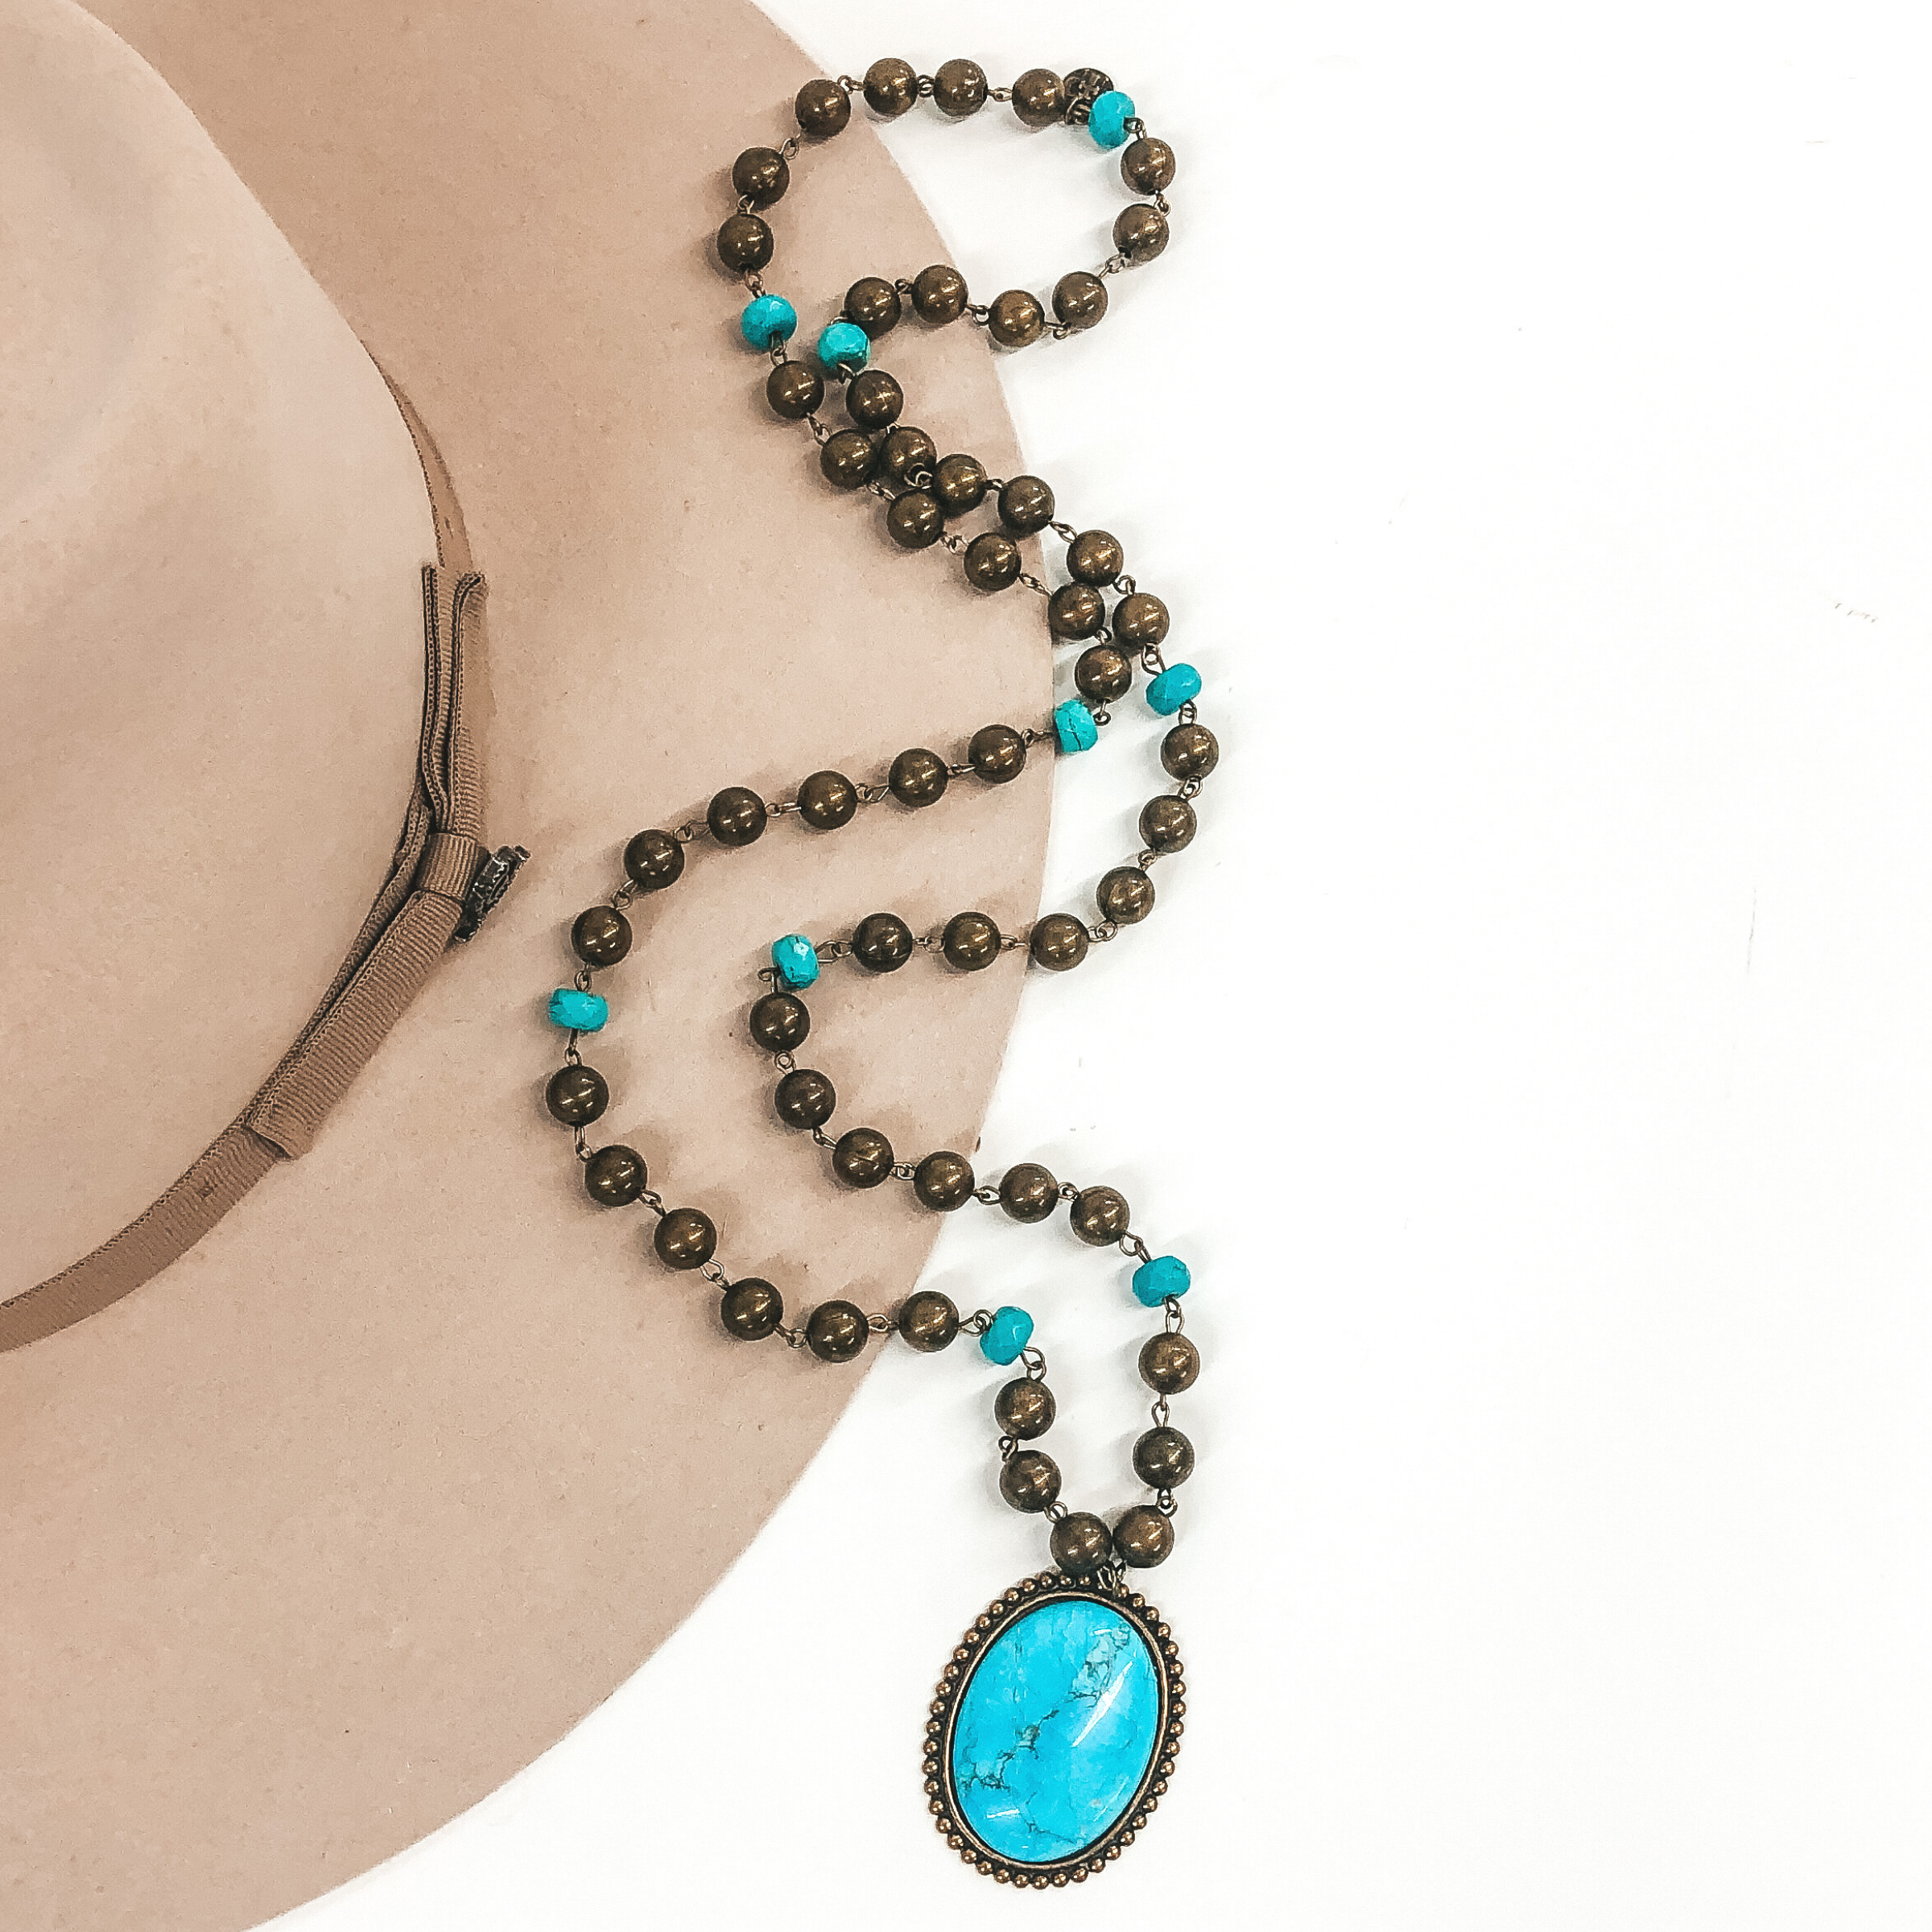 Pink Panache | Burnished Bronze and Turquoise Beaded Necklace with Medium Bronze Oval Turquoise Cabochon Pendant - Giddy Up Glamour Boutique